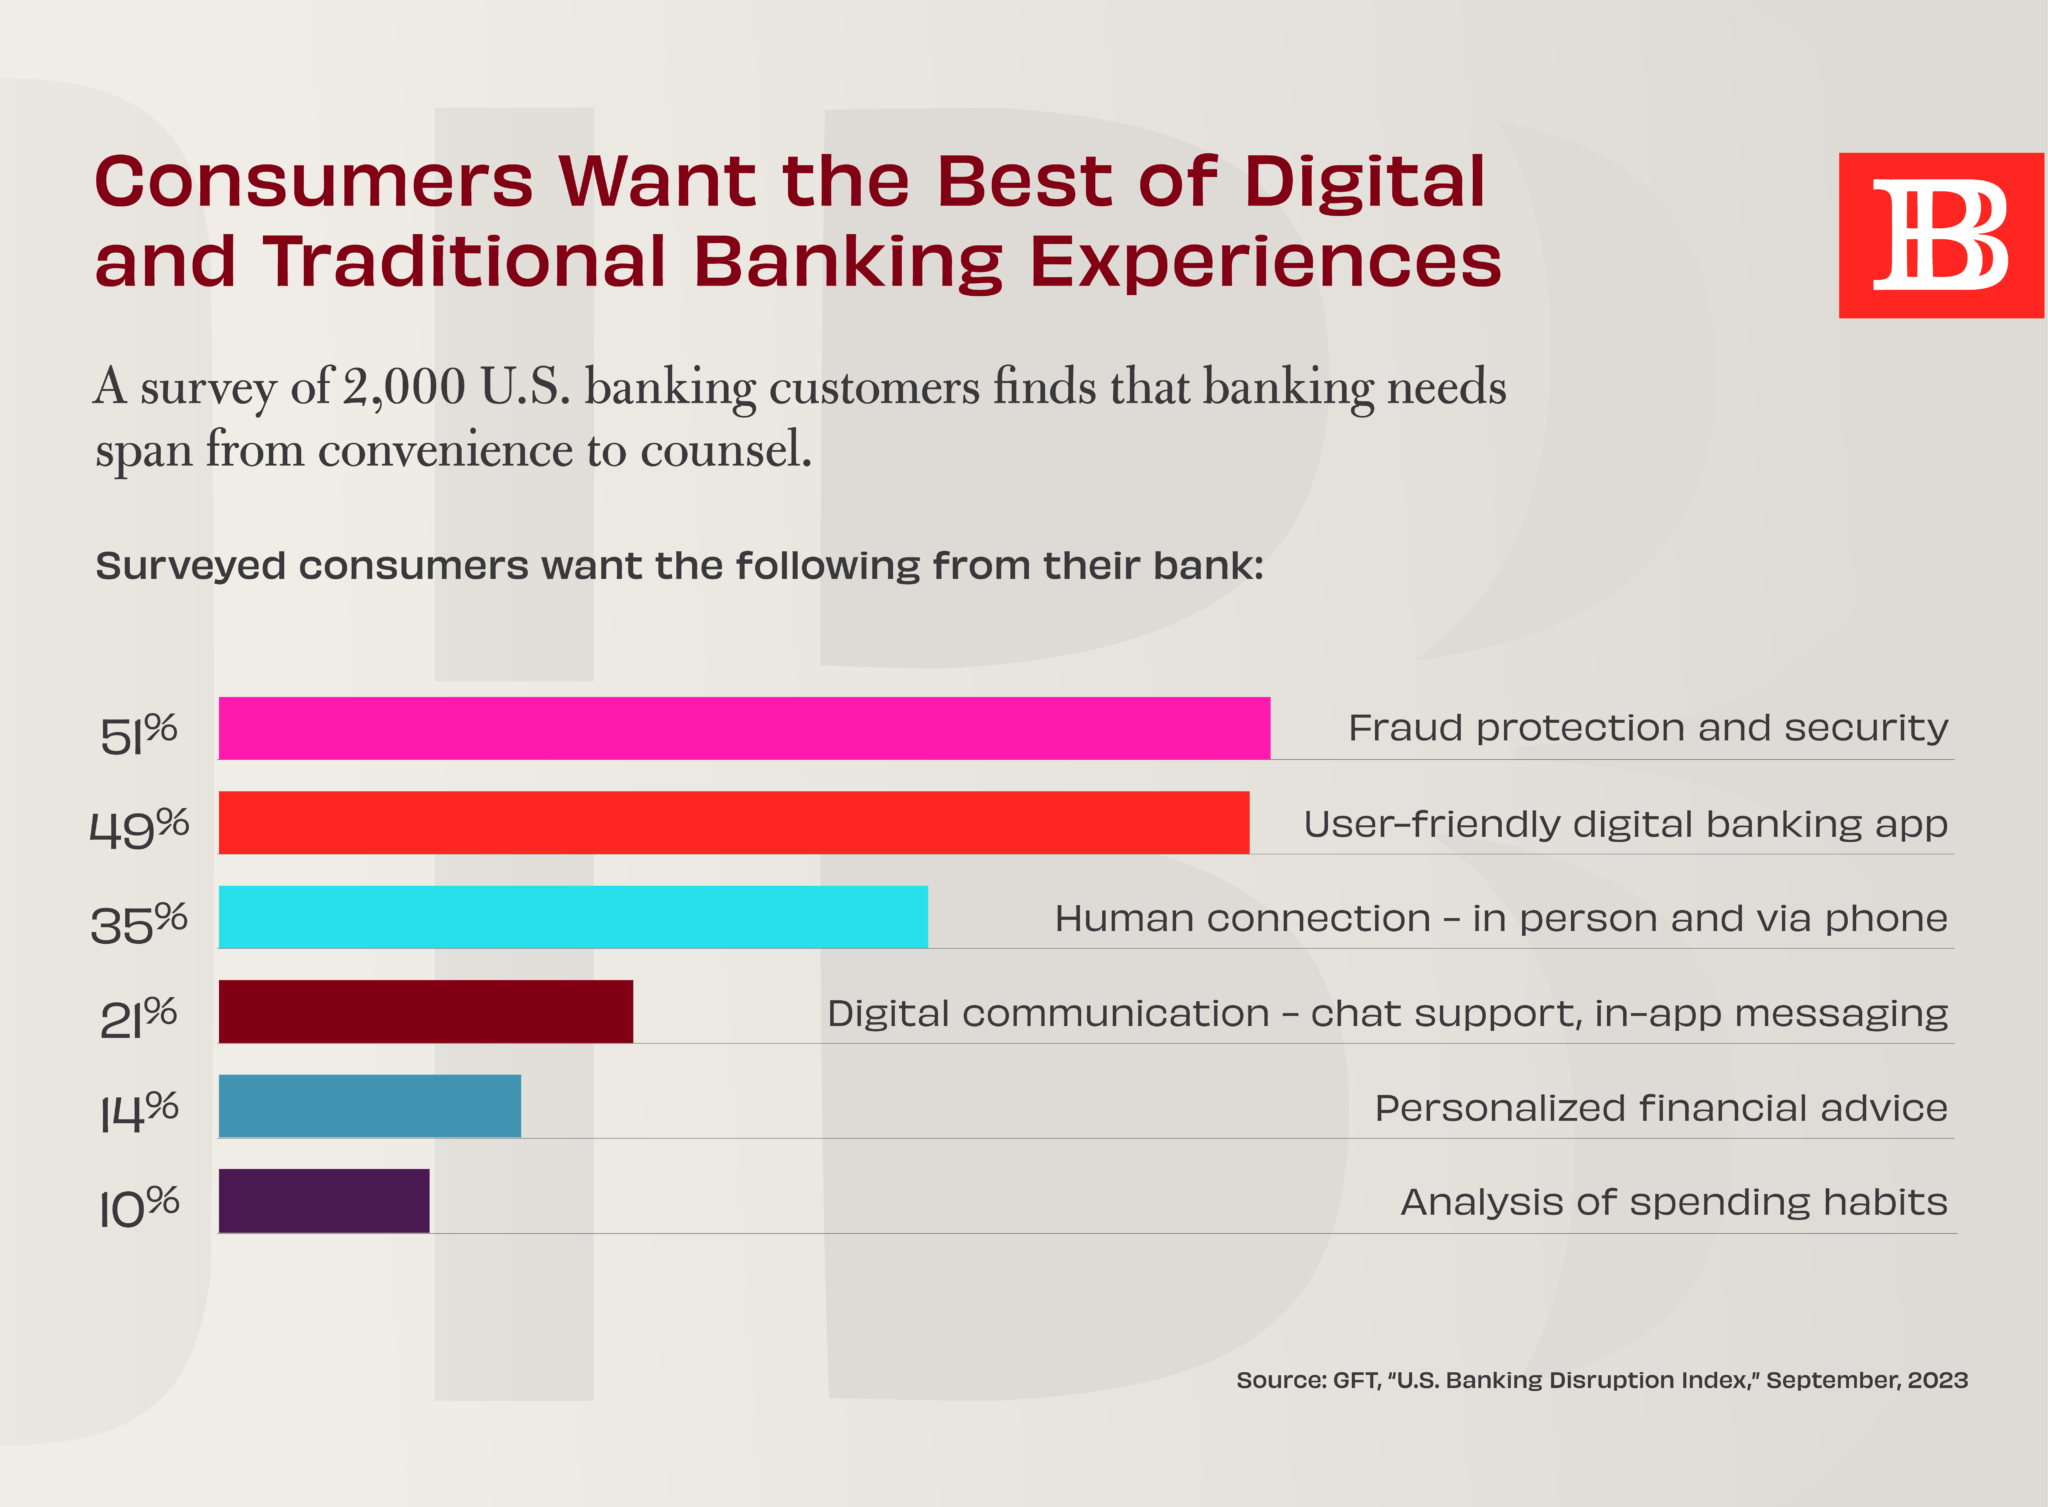 Consumers Want Best of Digital and Traditional Banking